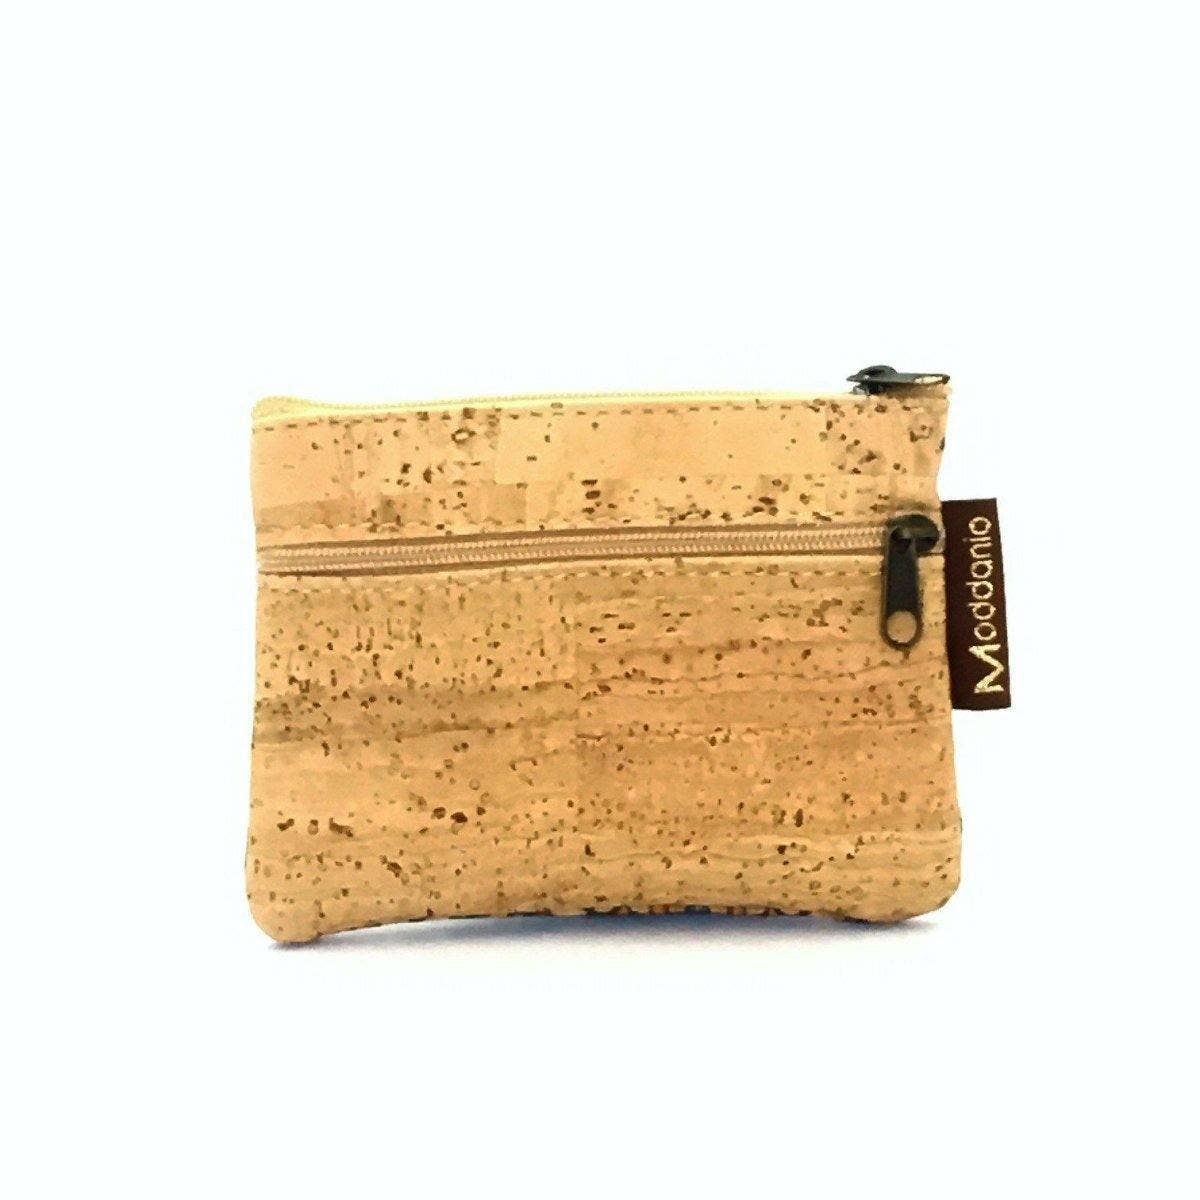 Cork Coin Purse and Vegan Change Pouch in a colourful mosaic pattern